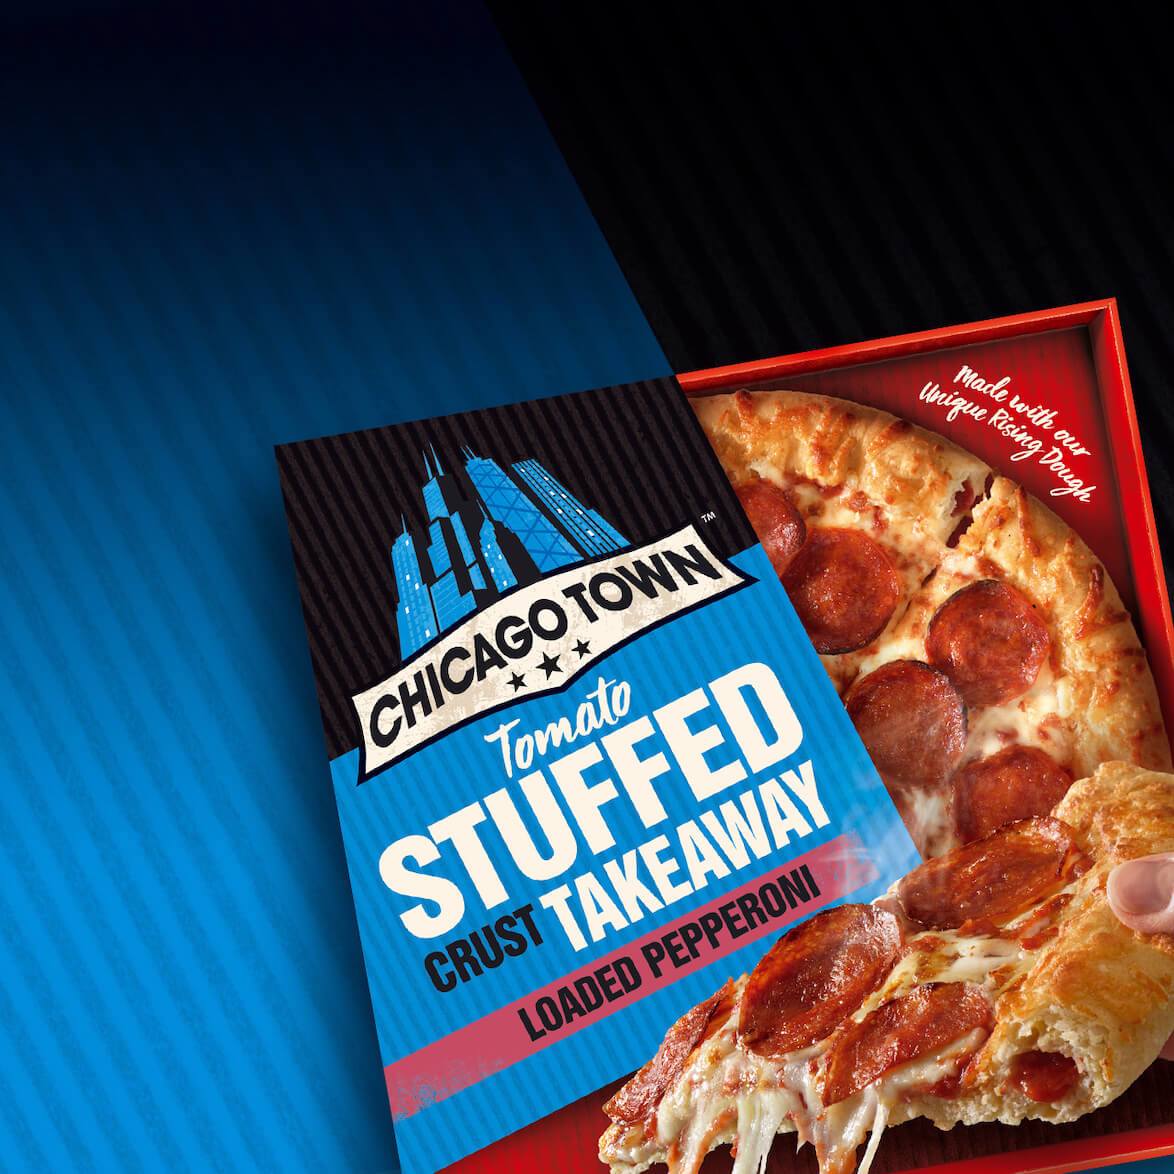 Chicago Town tomato stuffed crust loaded pepperoni pizza